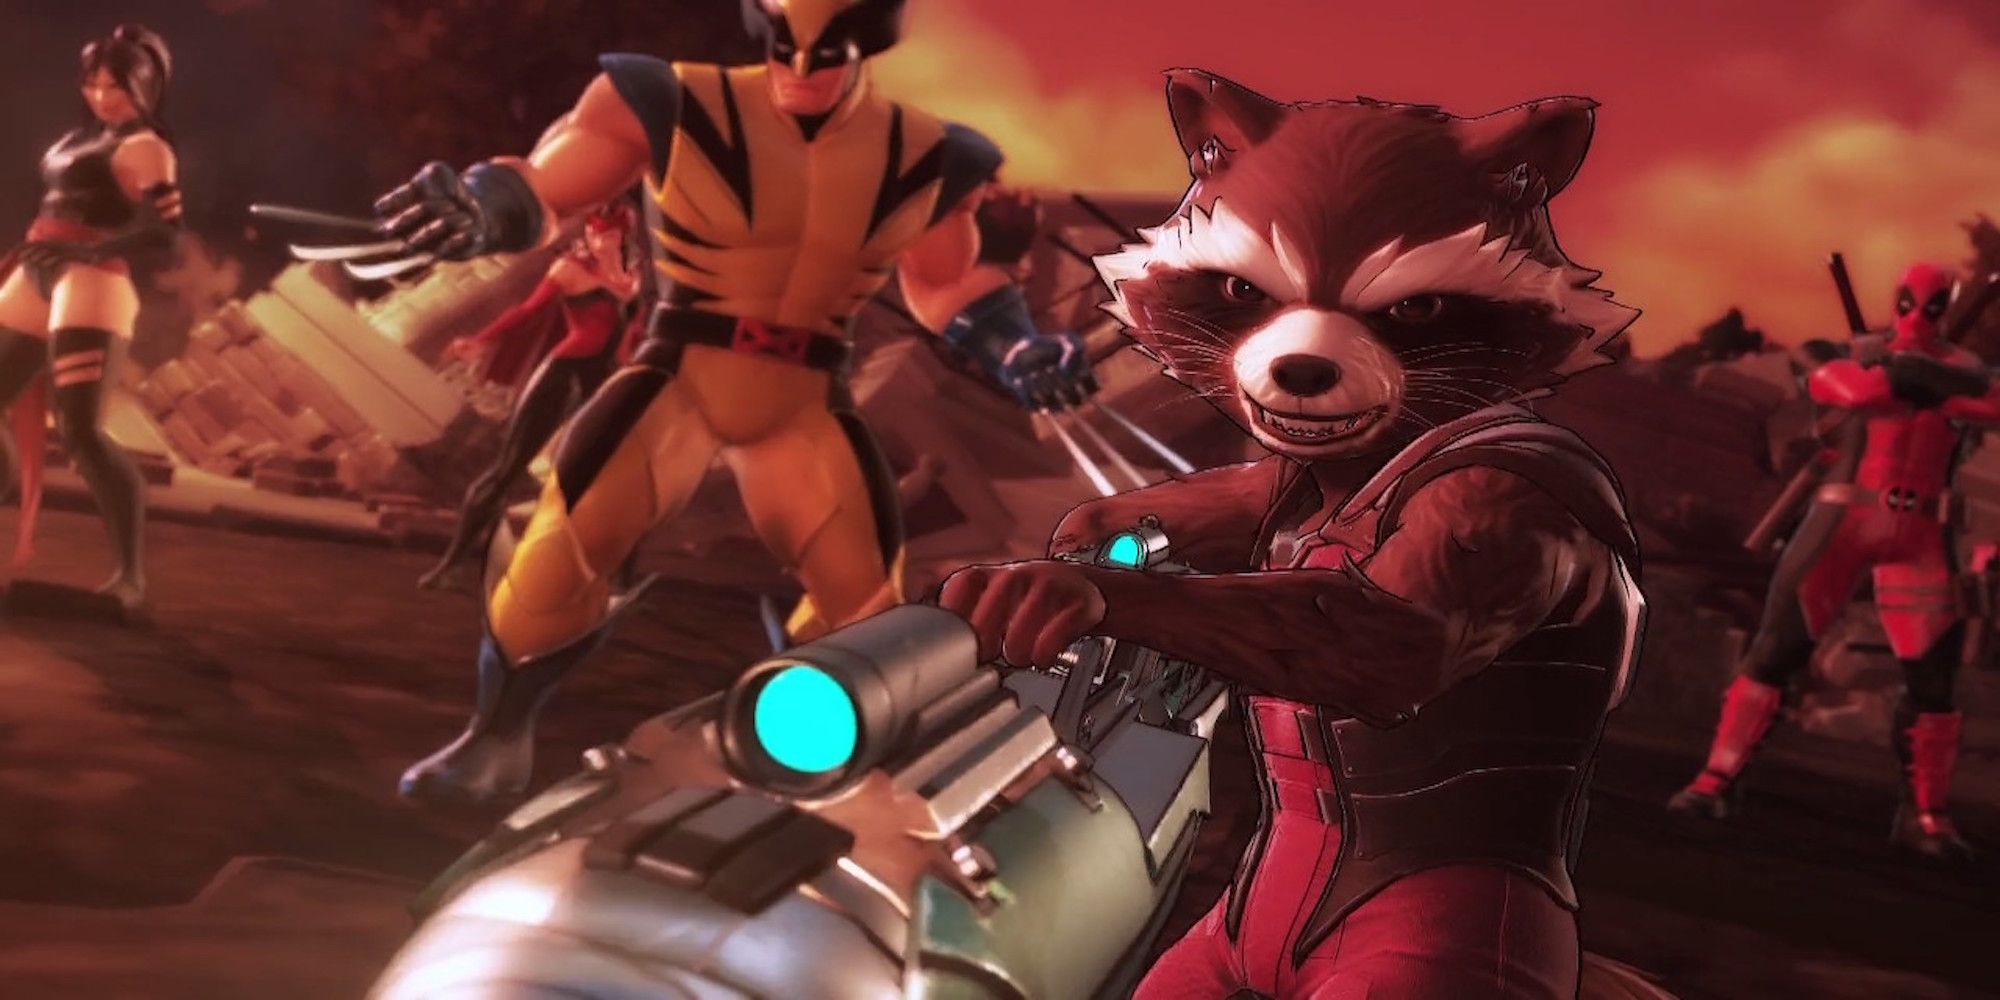 Rocket Raccoon from Marvel Ultimate Alliance 3